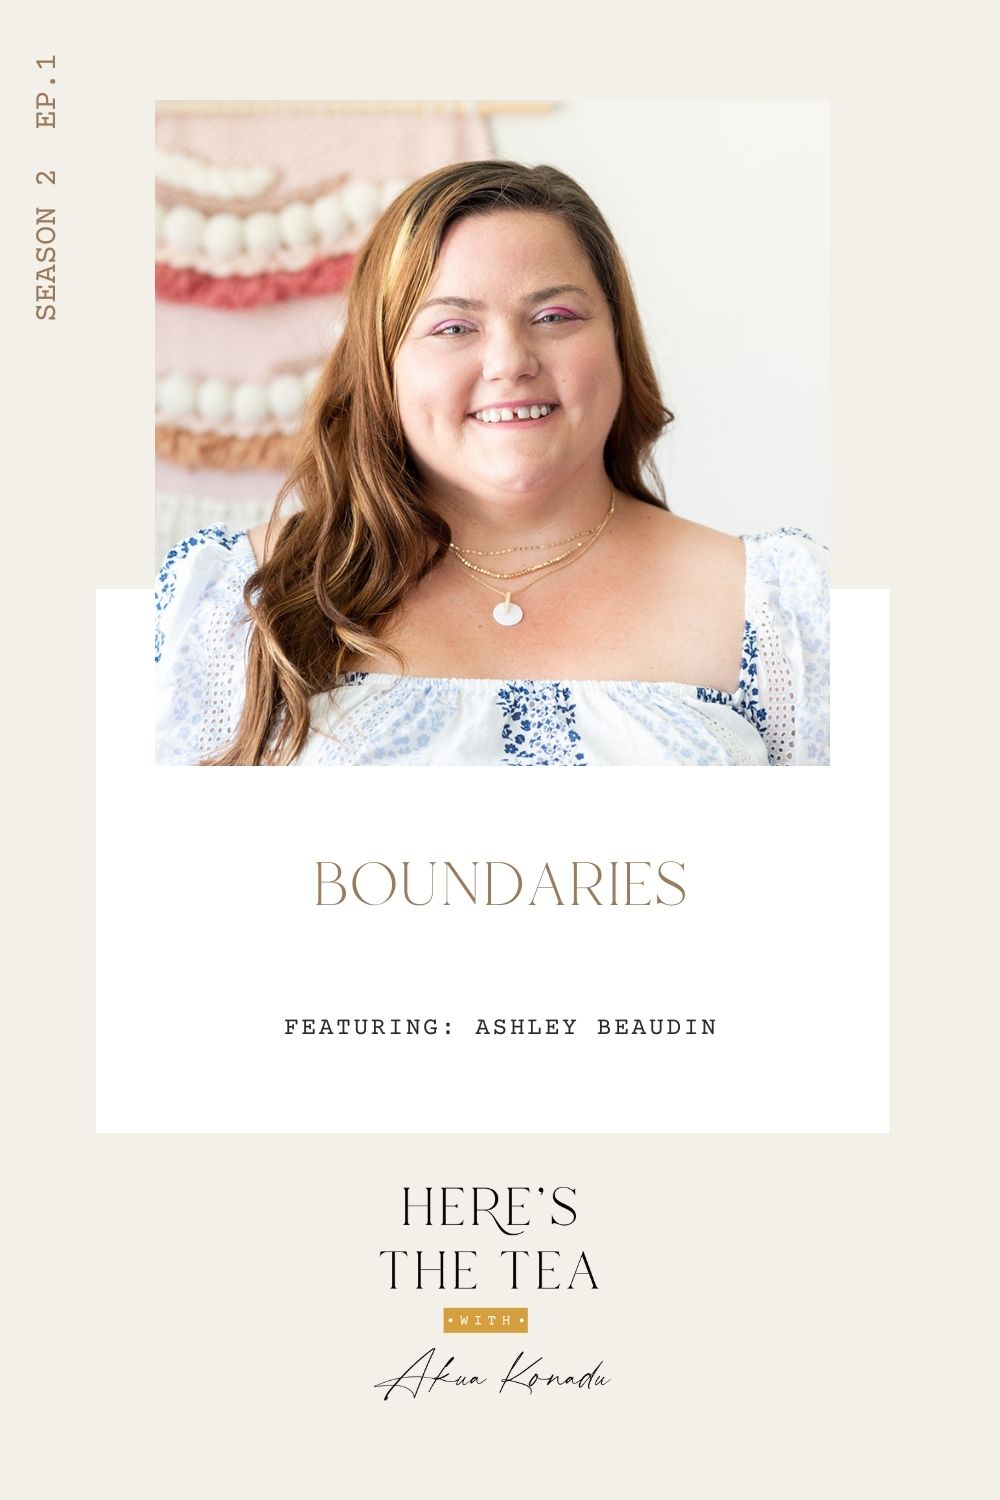 Setting Healthy Boundaries with Ashley Beaudin